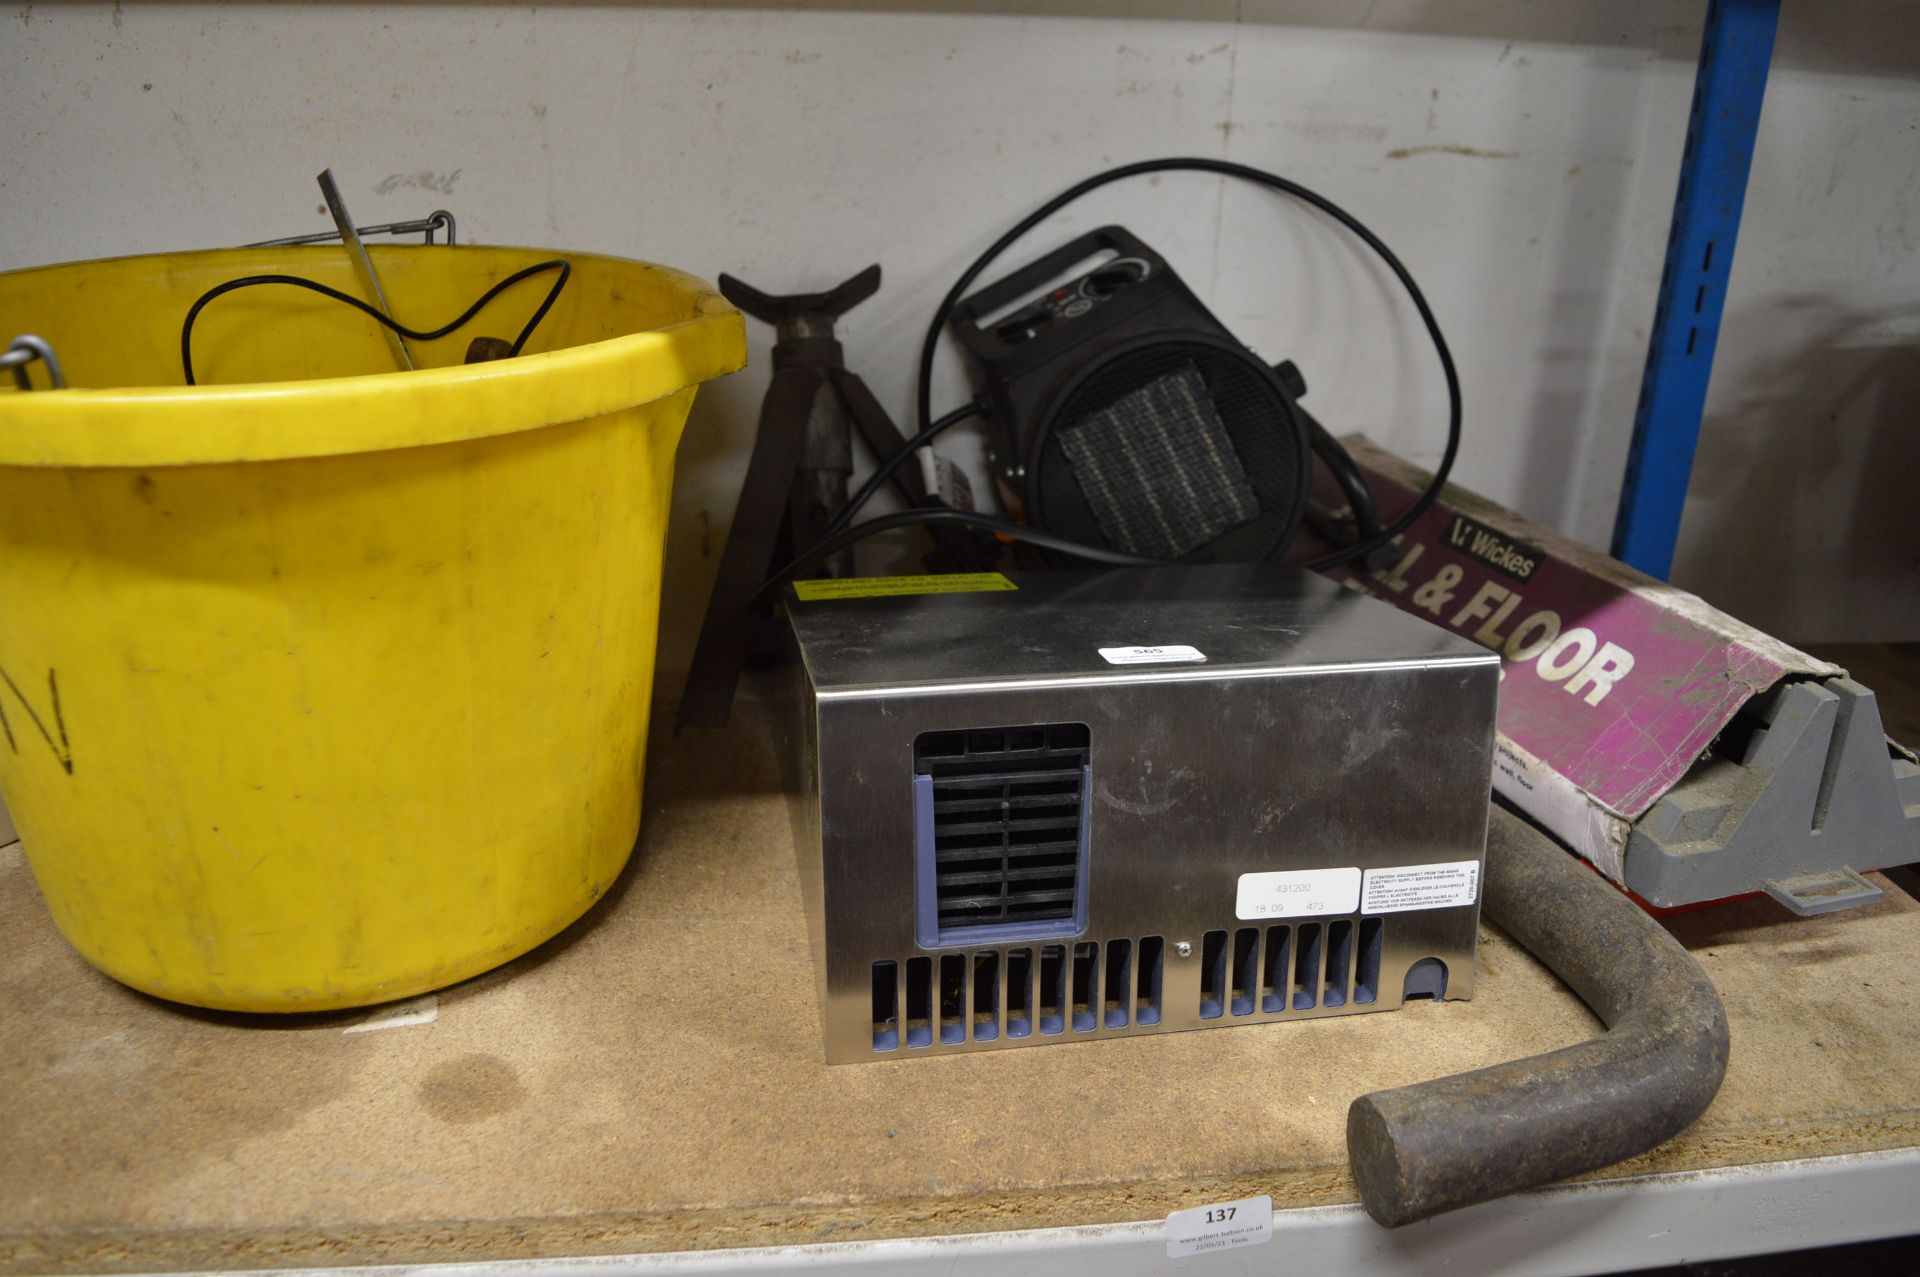 *Mixed Lot Including Hand Dryer, Tile Cutter, Fireball Heater, Single Axle Stand, etc.